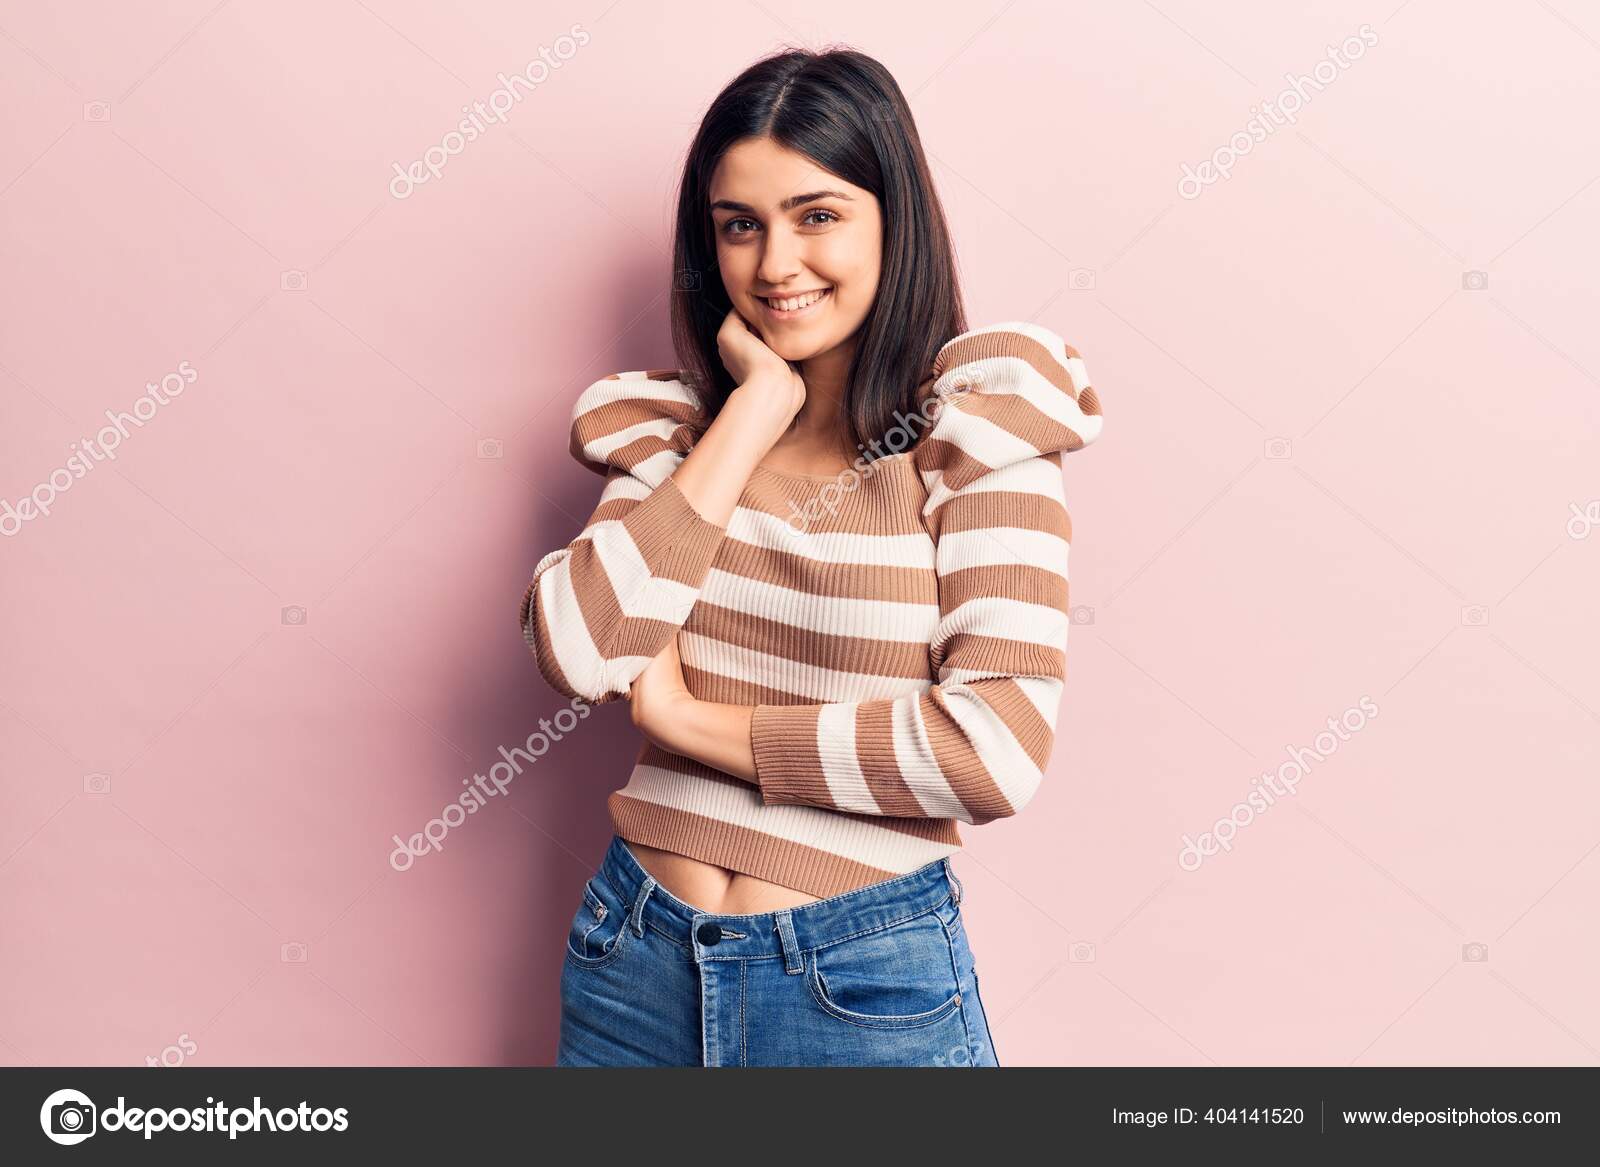 Happy Young Woman Casual Clothes Smiling Stock Photo 183622532